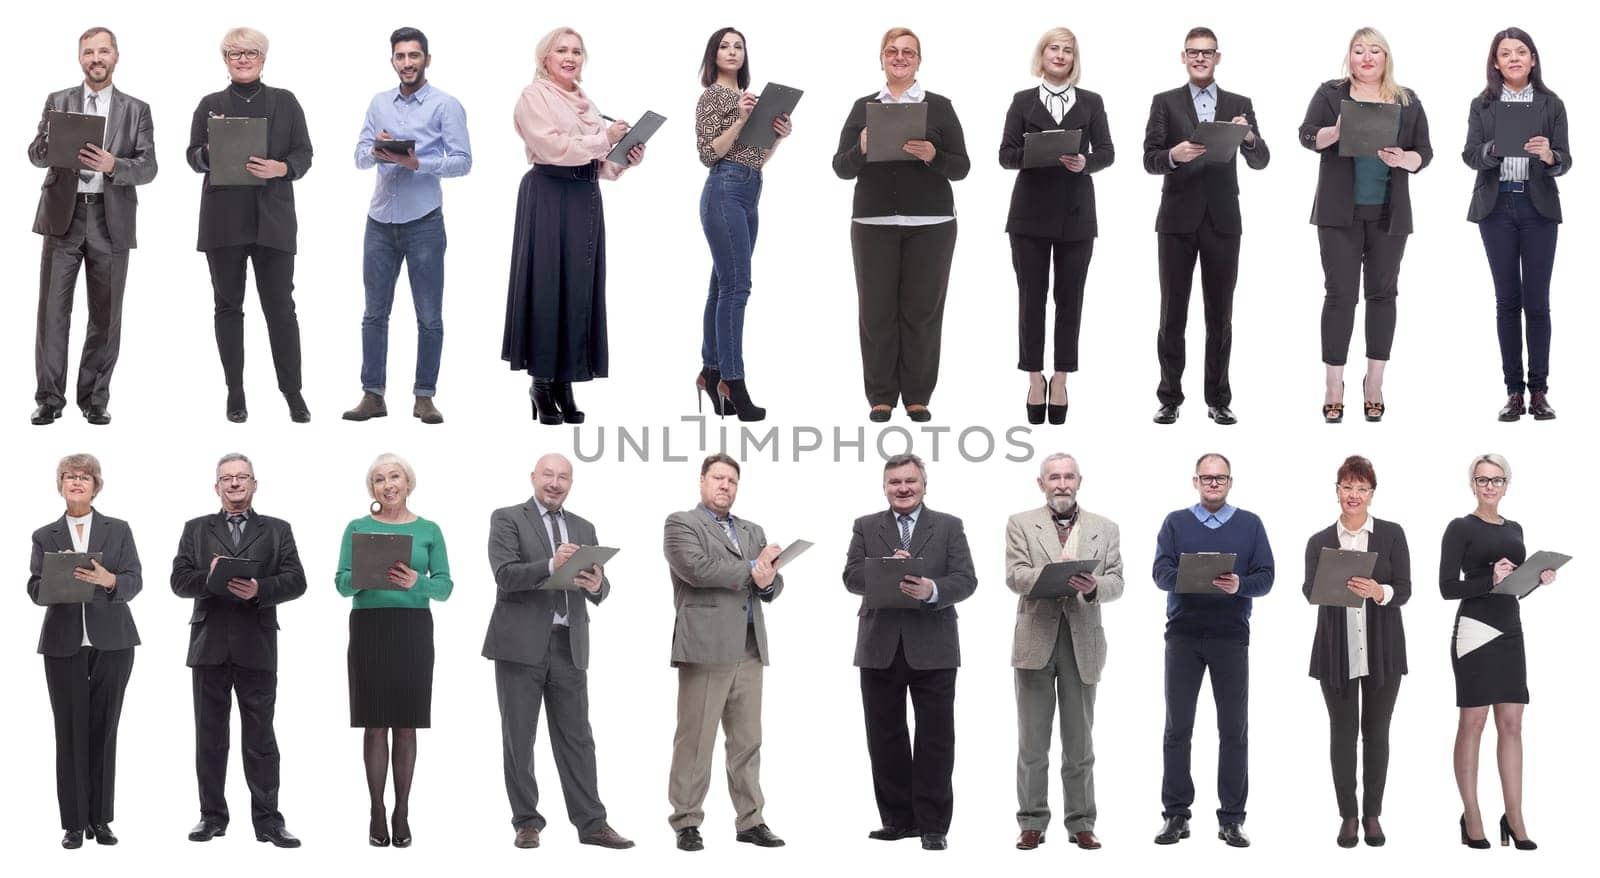 group of successful people with notepad in hands isolated on white background